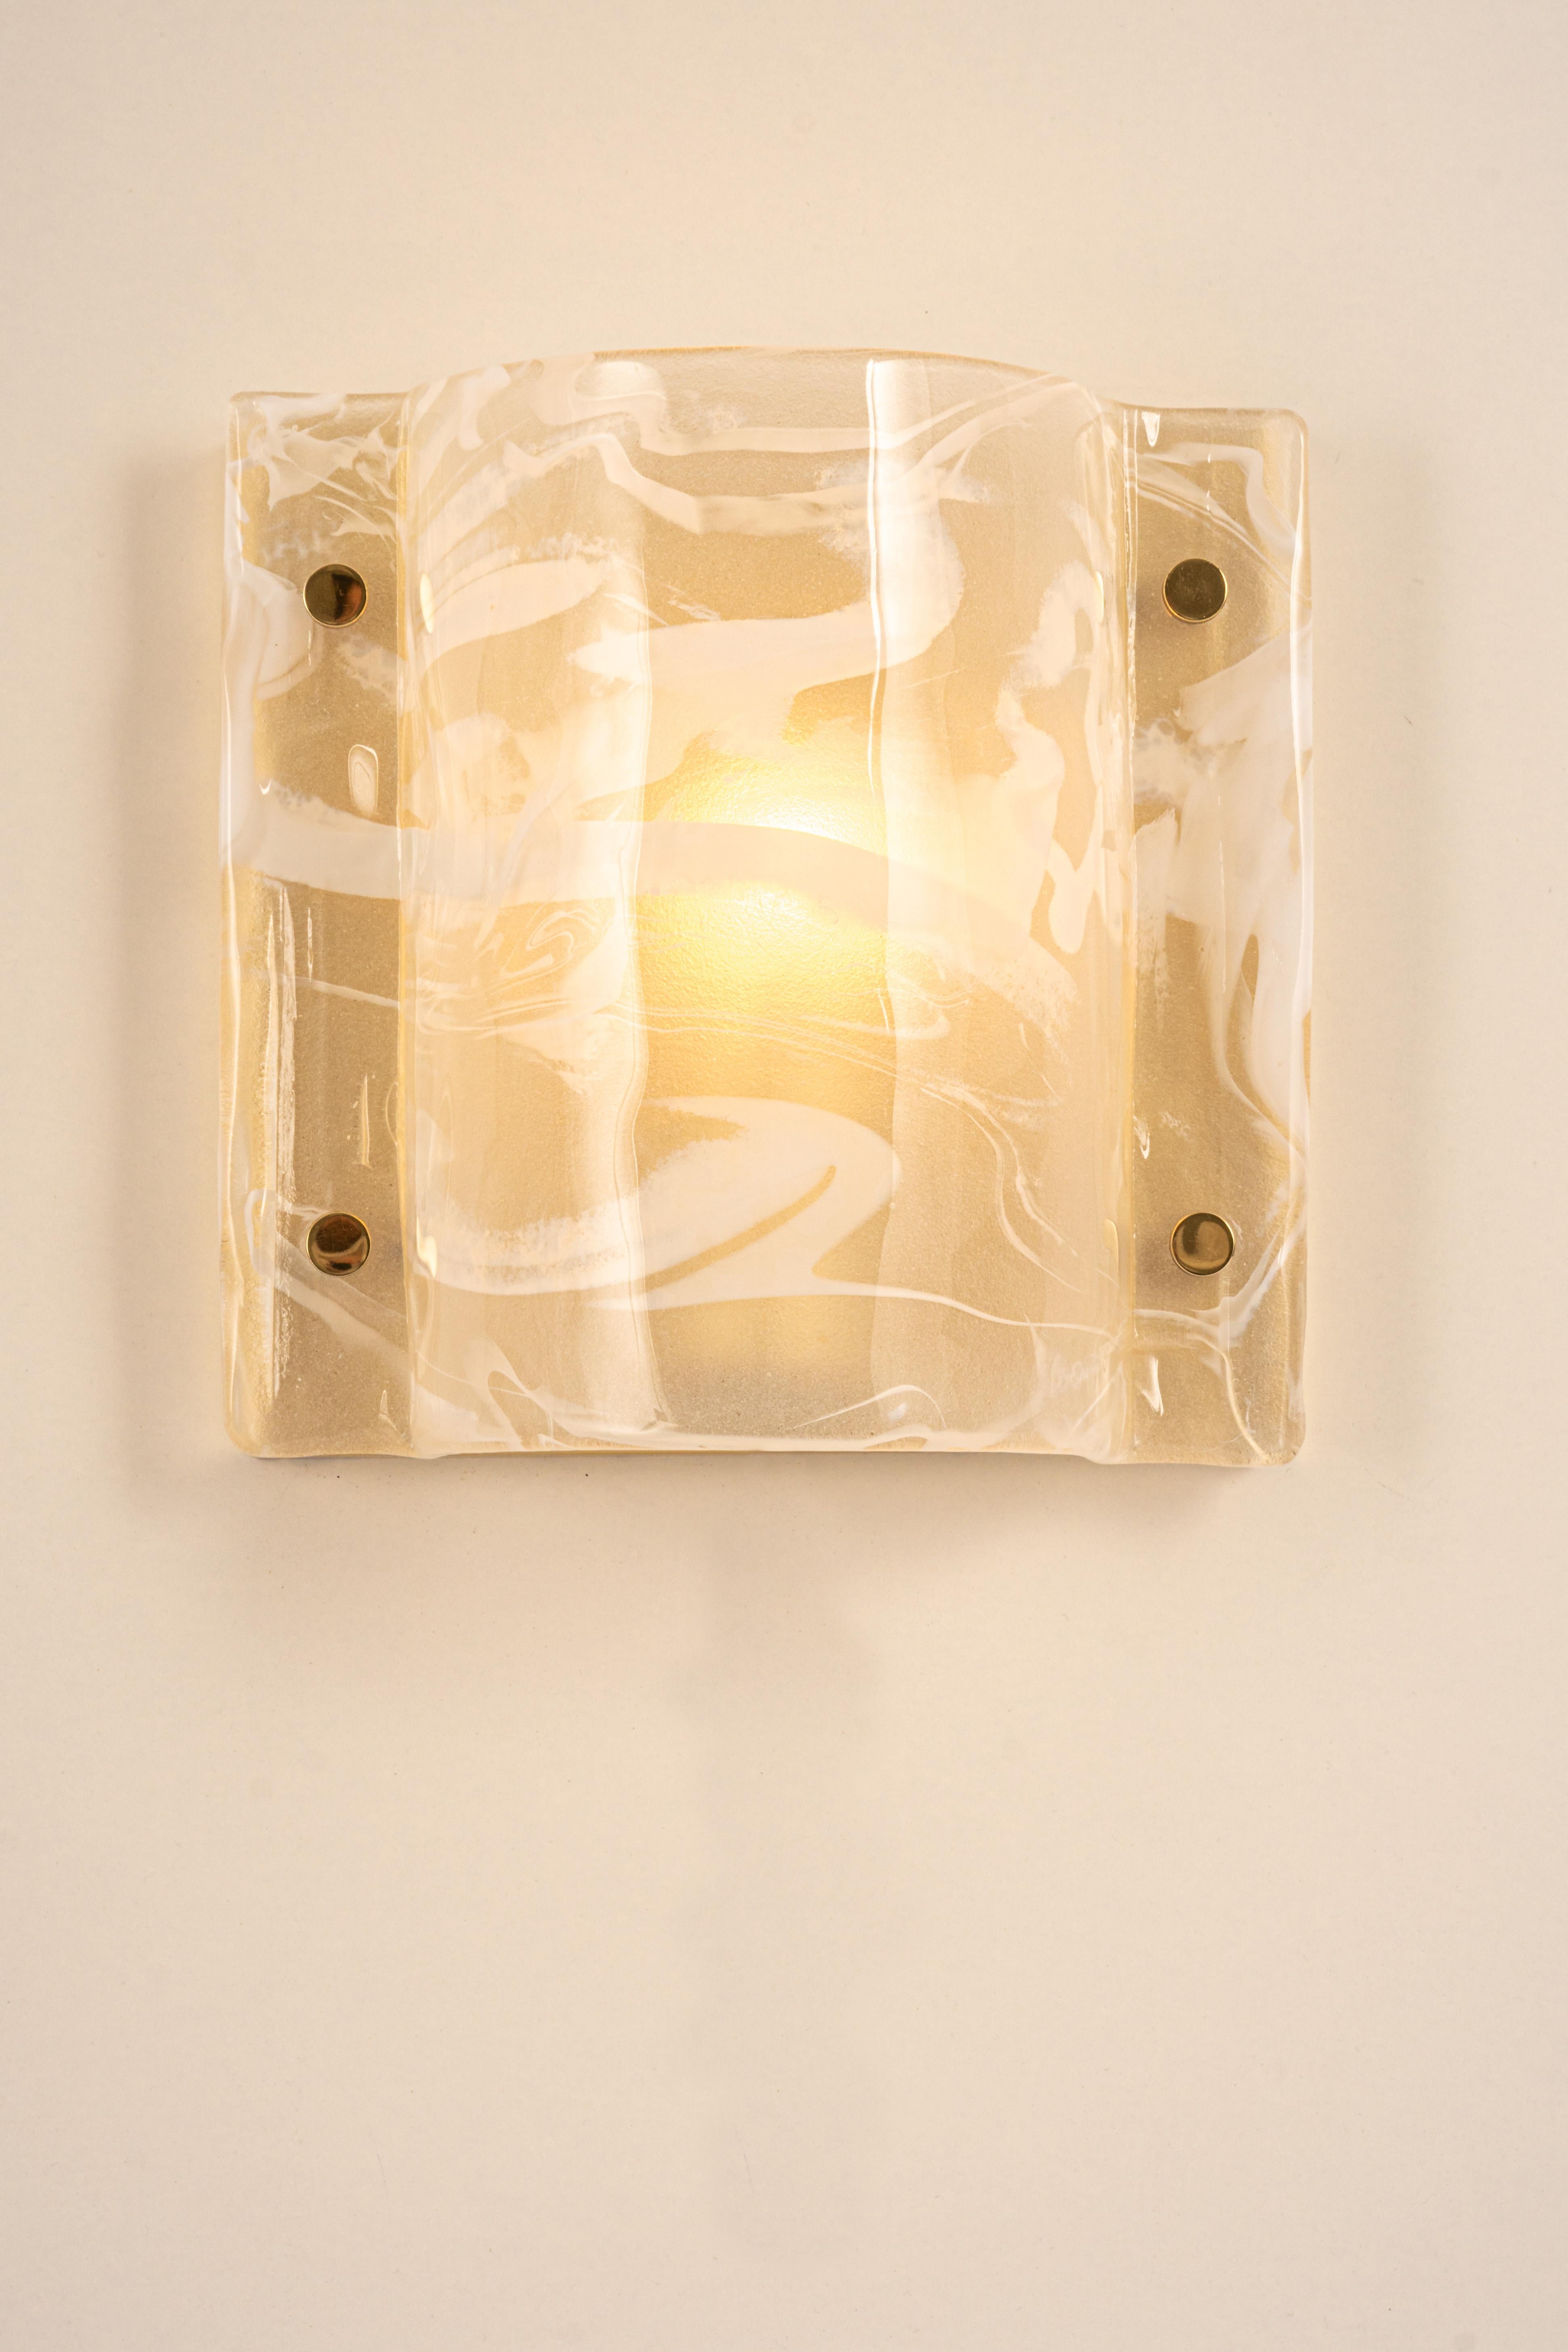 Brass 1 of 8  Murano Glass Wall Sconces by Hillebrand, Germany, 1970s For Sale